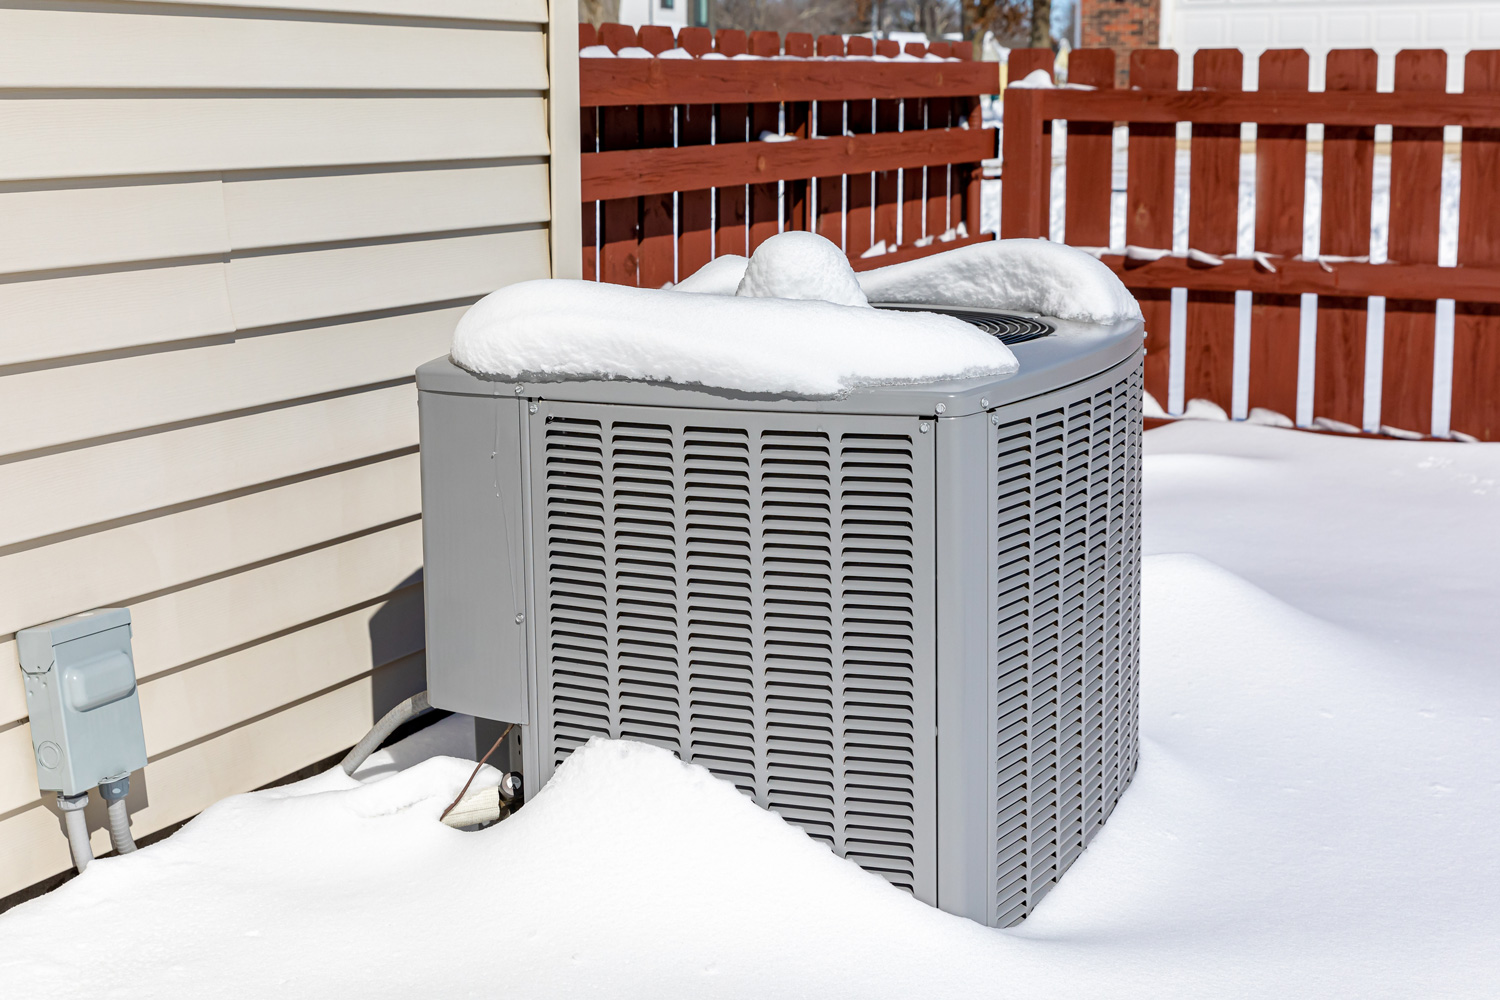 House air conditioning unit covered in snow during winter